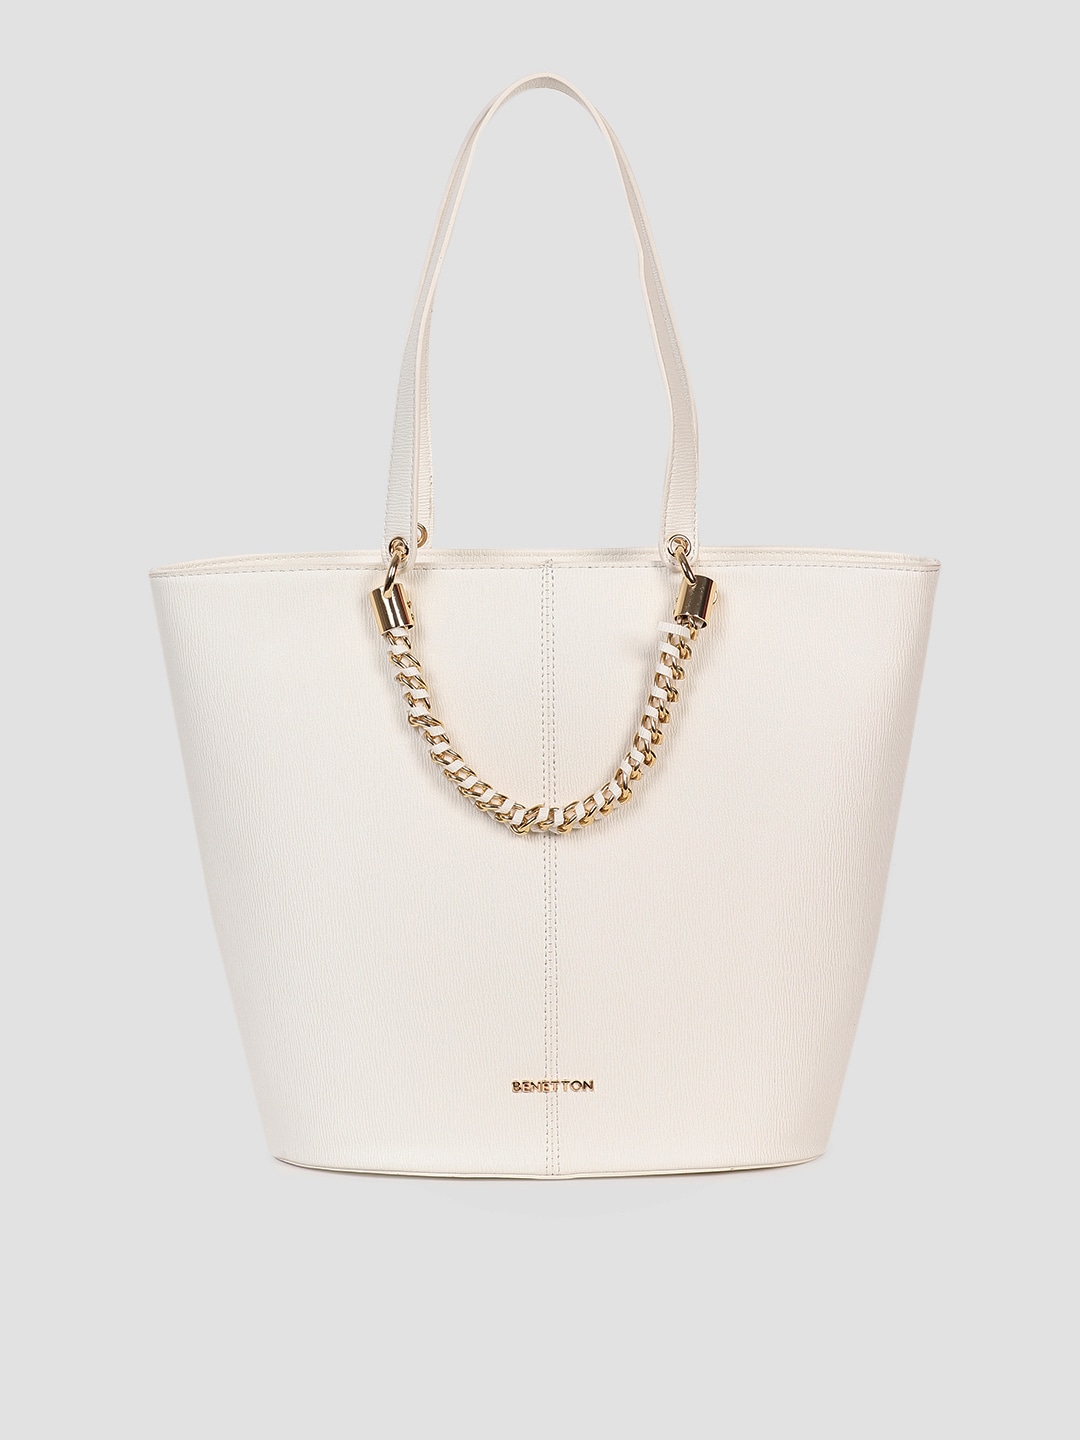 United Colors of Benetton White Shoulder Bag Price in India